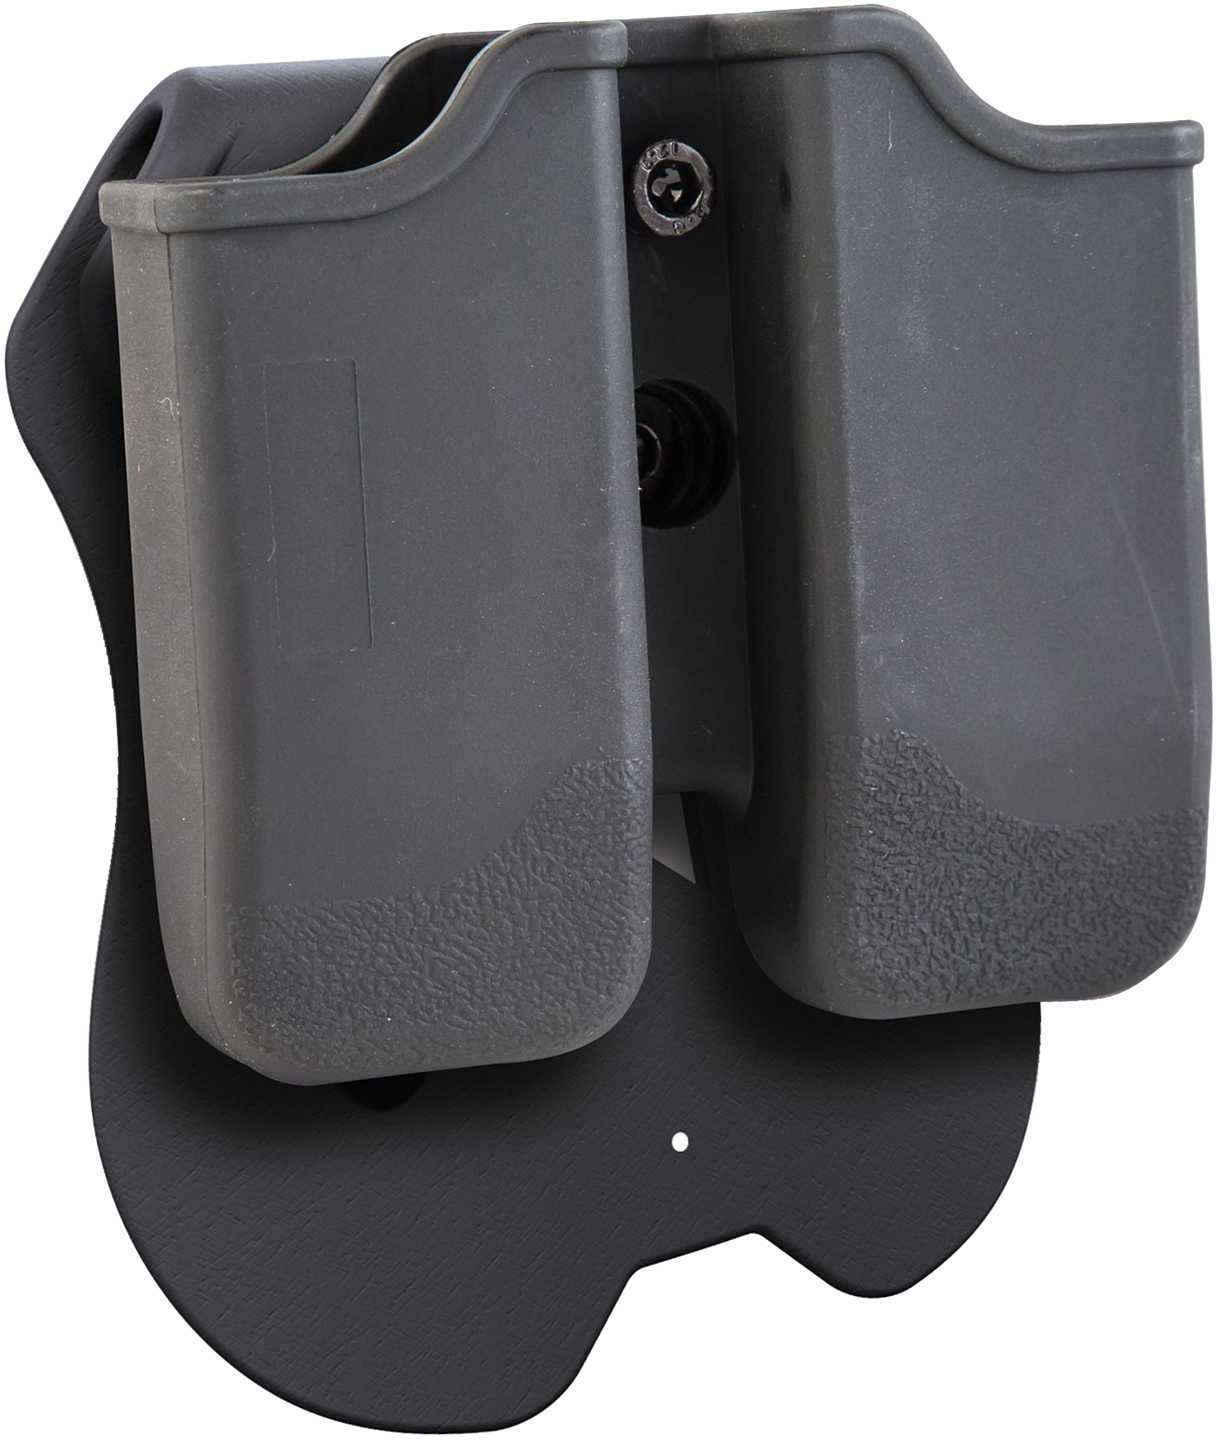 Caldwell Tac Ops Magazine Holster Taurus 24/7 Md: 110072